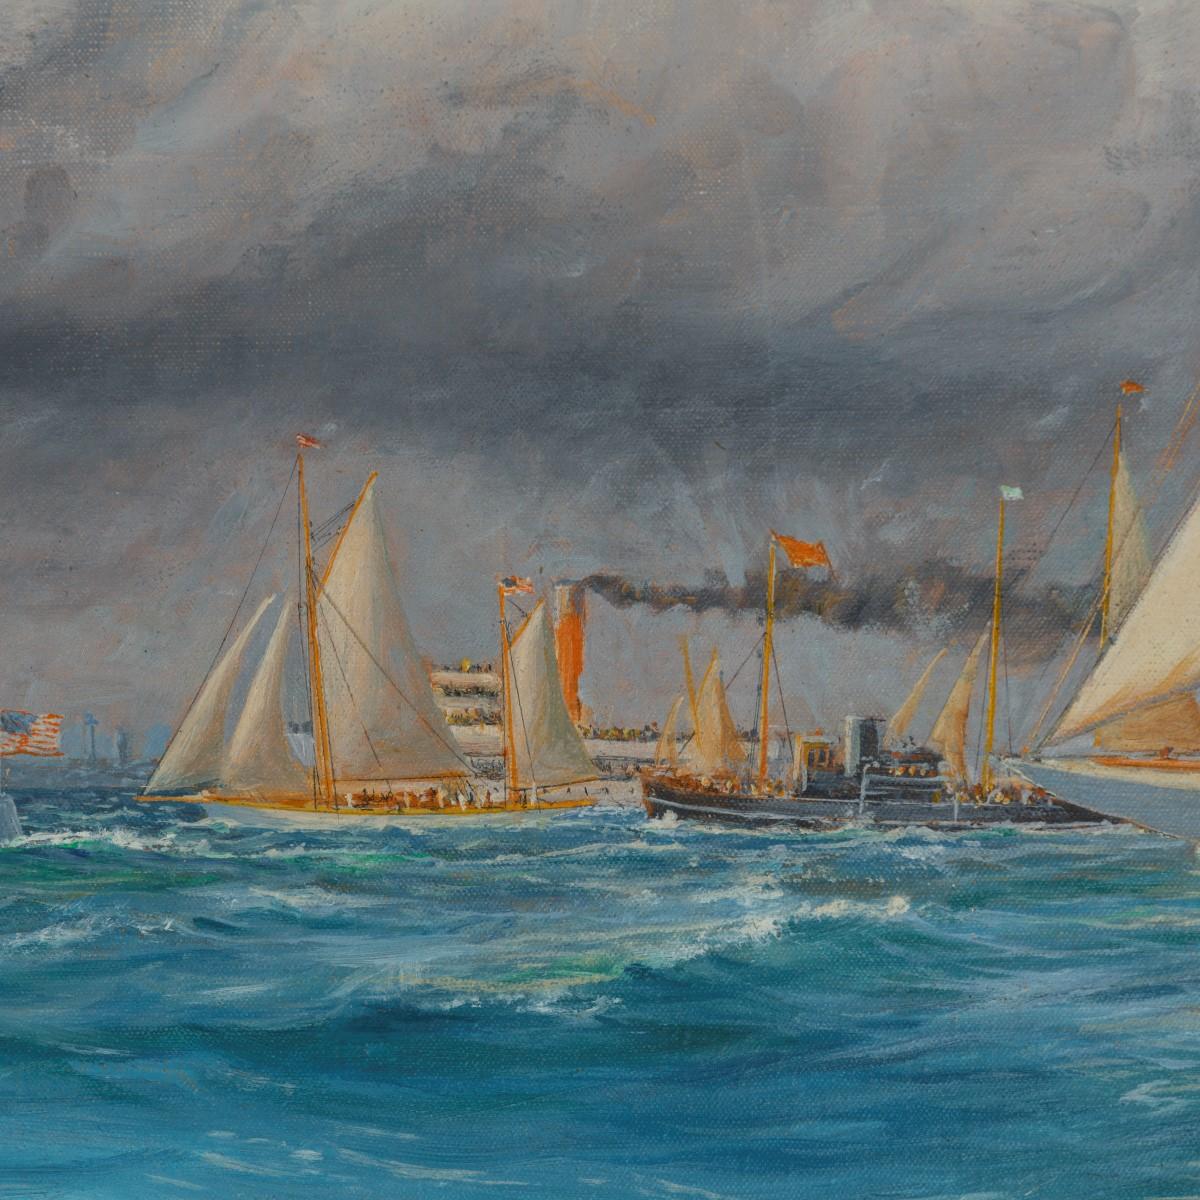 1930 America’s Cup racing off Newport, signed ‘Harold Wyllie’